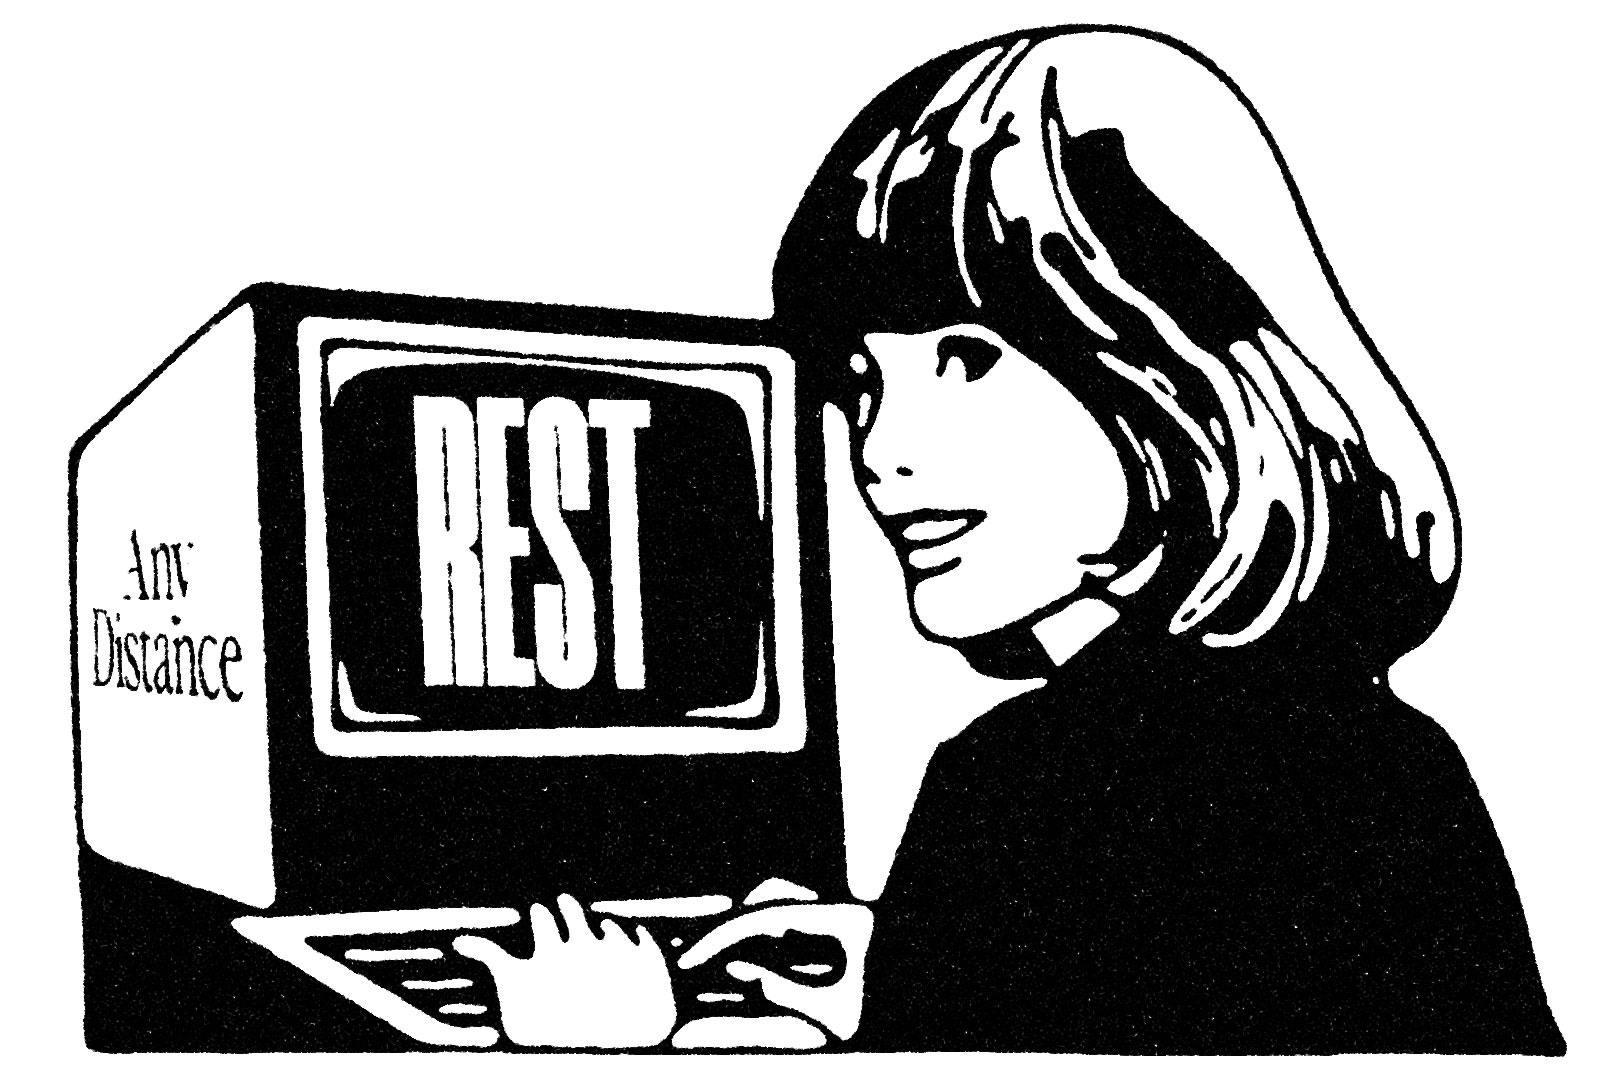 Woman types into retro computer, "rest" appearing on the screen and the Any Distance logo on the side of the computer.